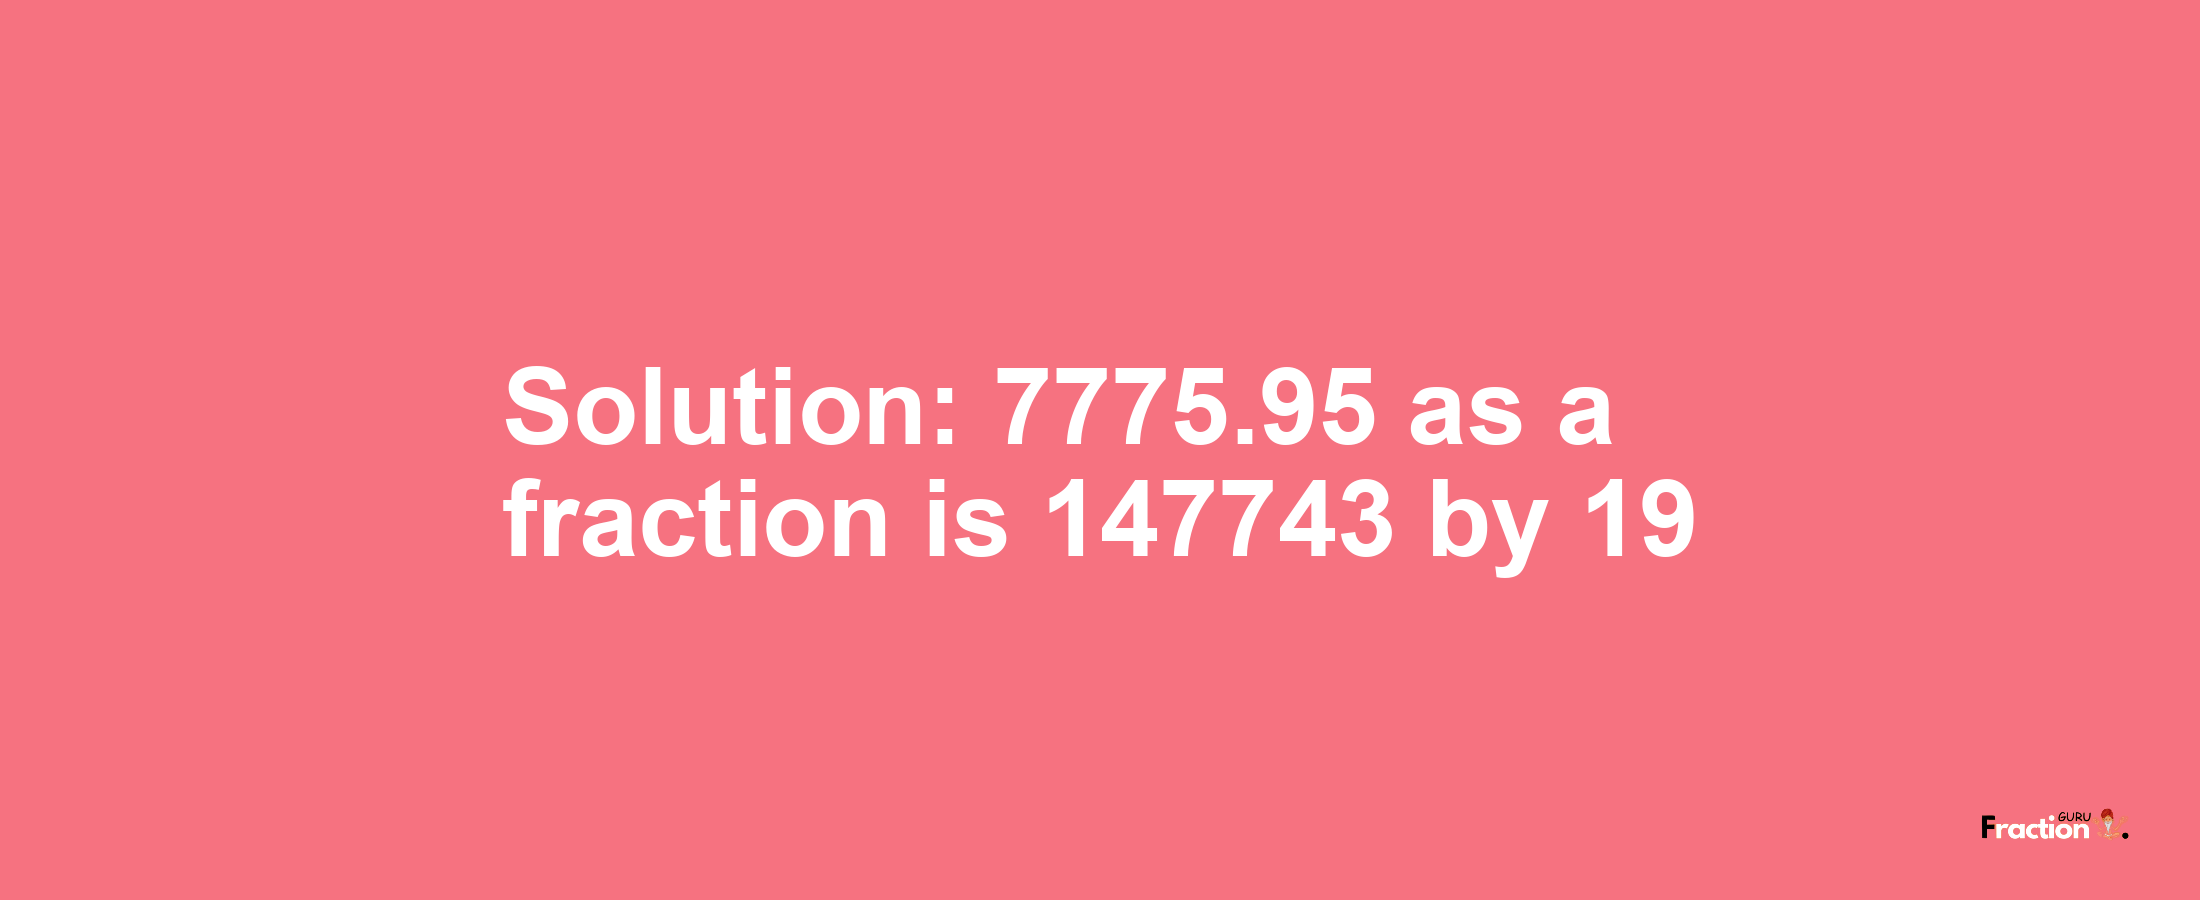 Solution:7775.95 as a fraction is 147743/19